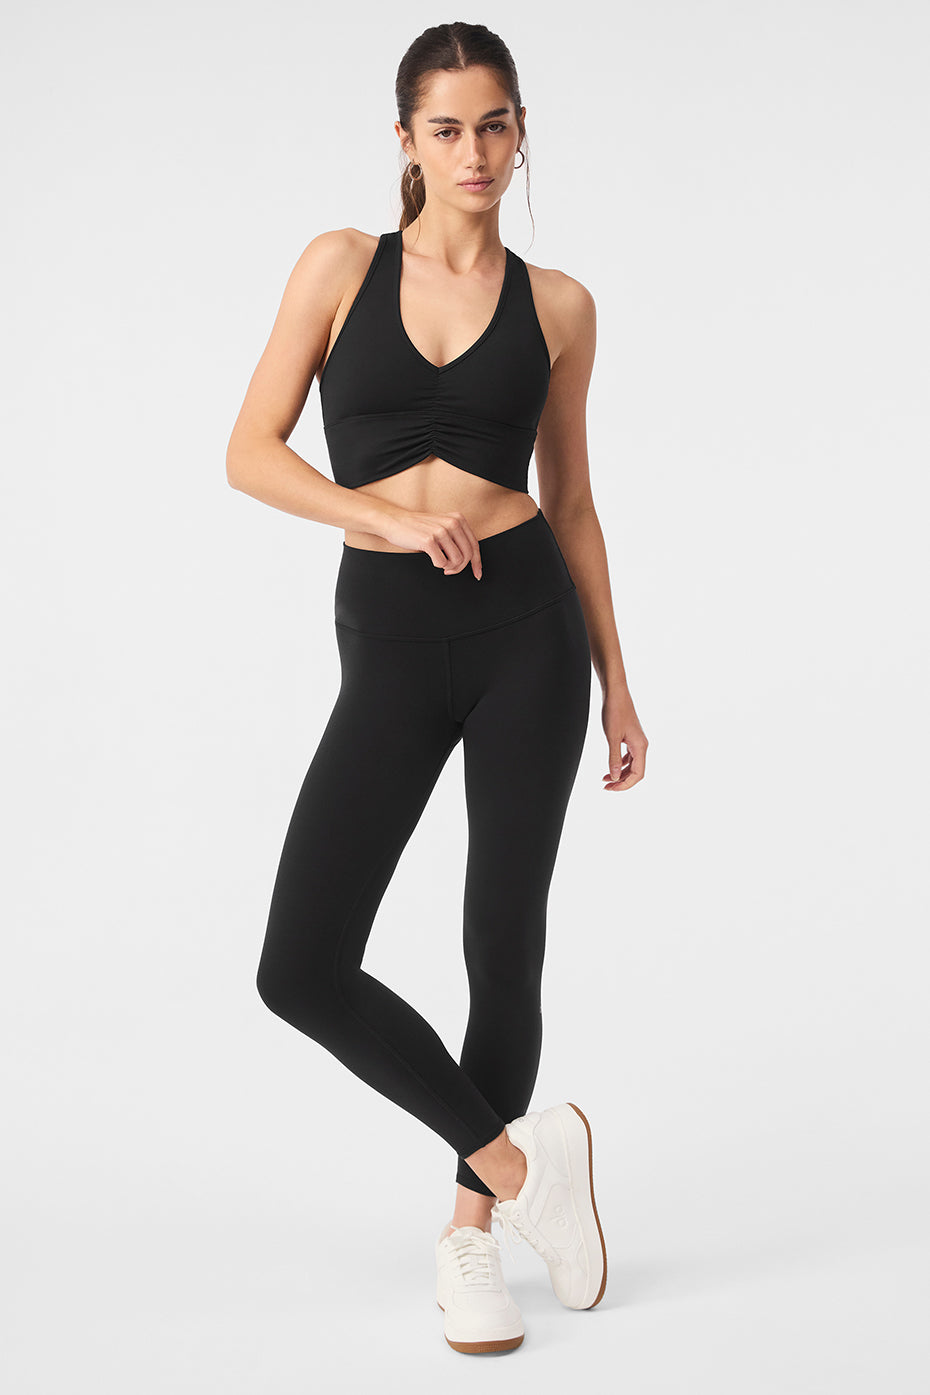 A Fun Set: Alo High-Waist Airbrush Legging and Real Bra Tank, 45 Essential  Workout Pieces You Can Score on Sale This Presidents' Day